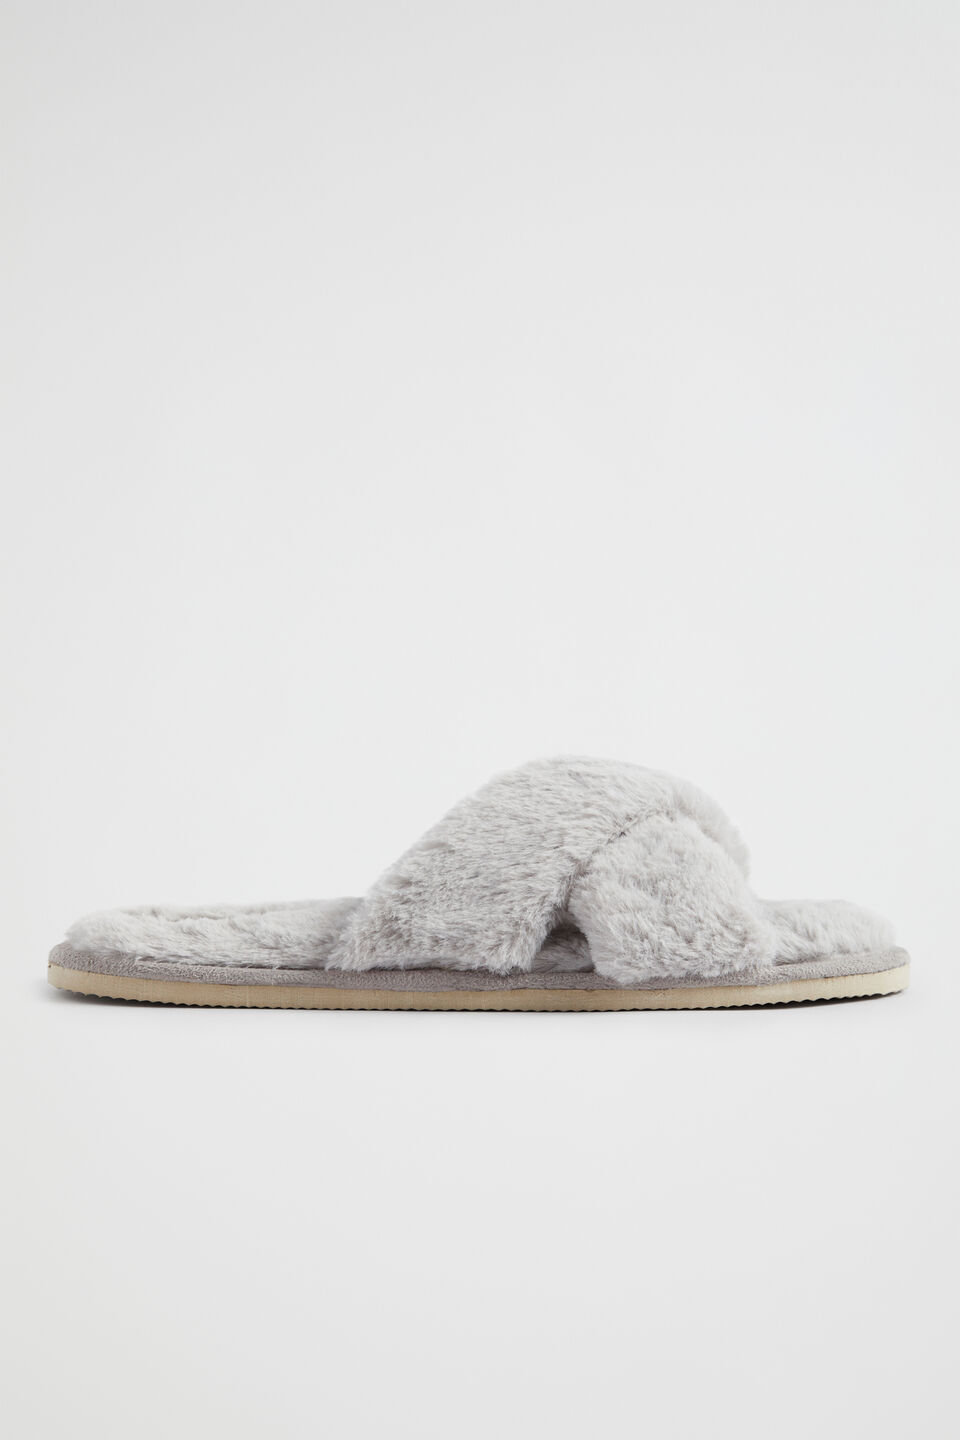 Crossover Slippers  Grey